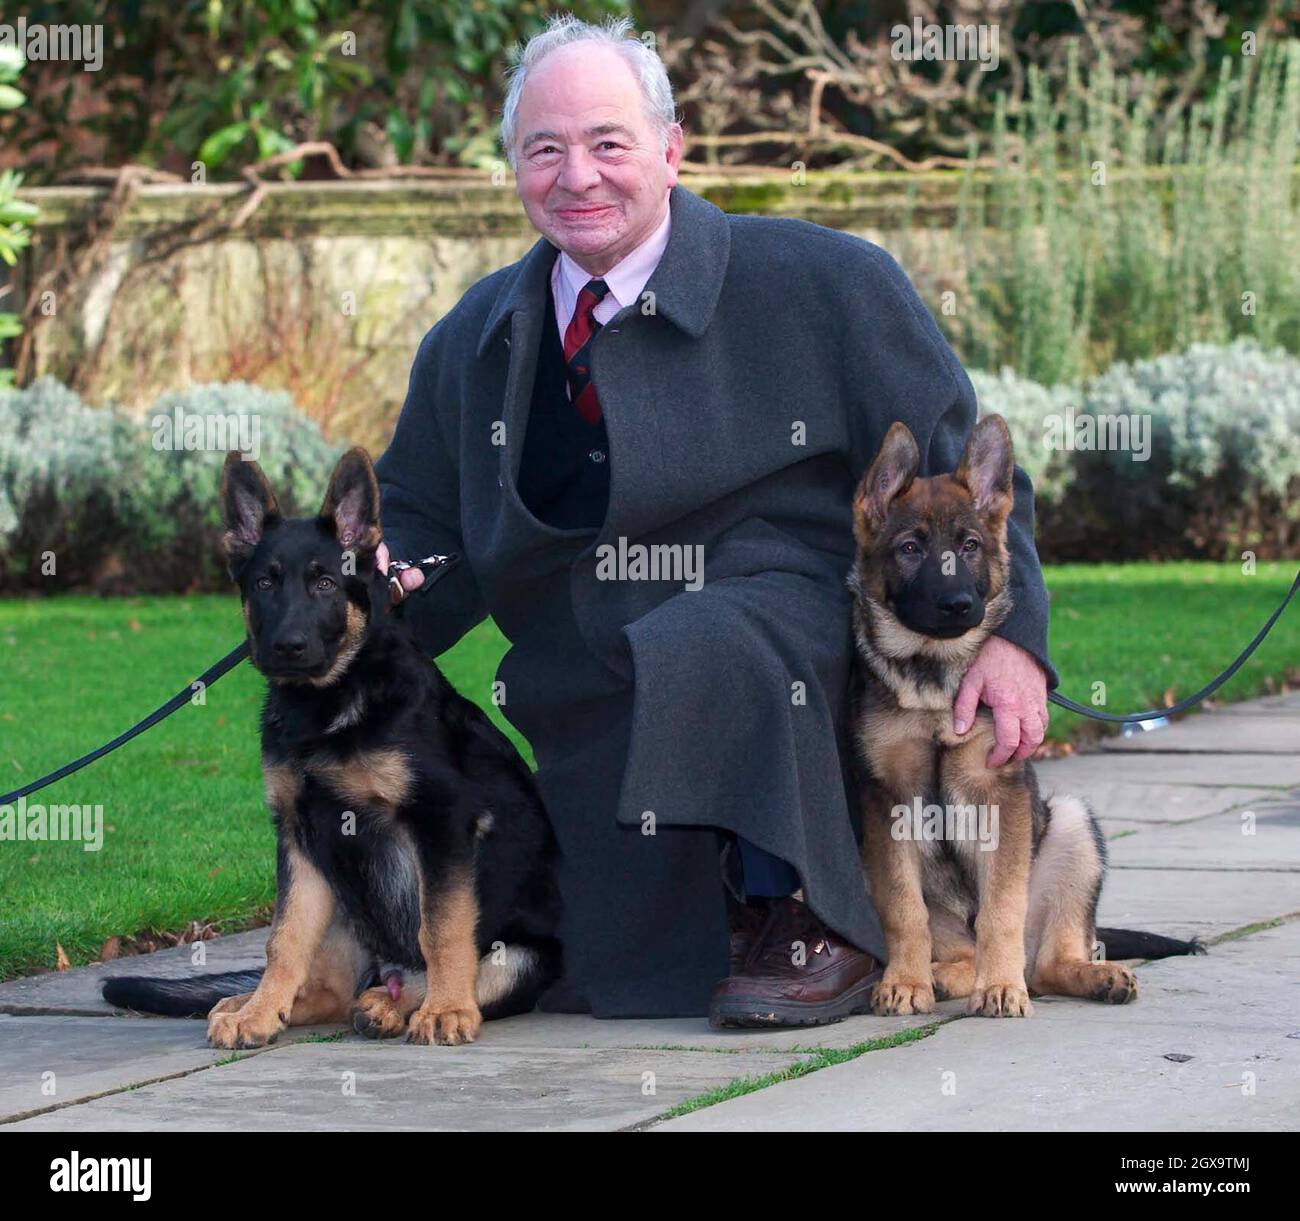 Colin Dexter, the creator of Inspector Morse, pictured with two Oxford Police dogs named after the series' two main characters, Morse and Lewis. Stock Photo